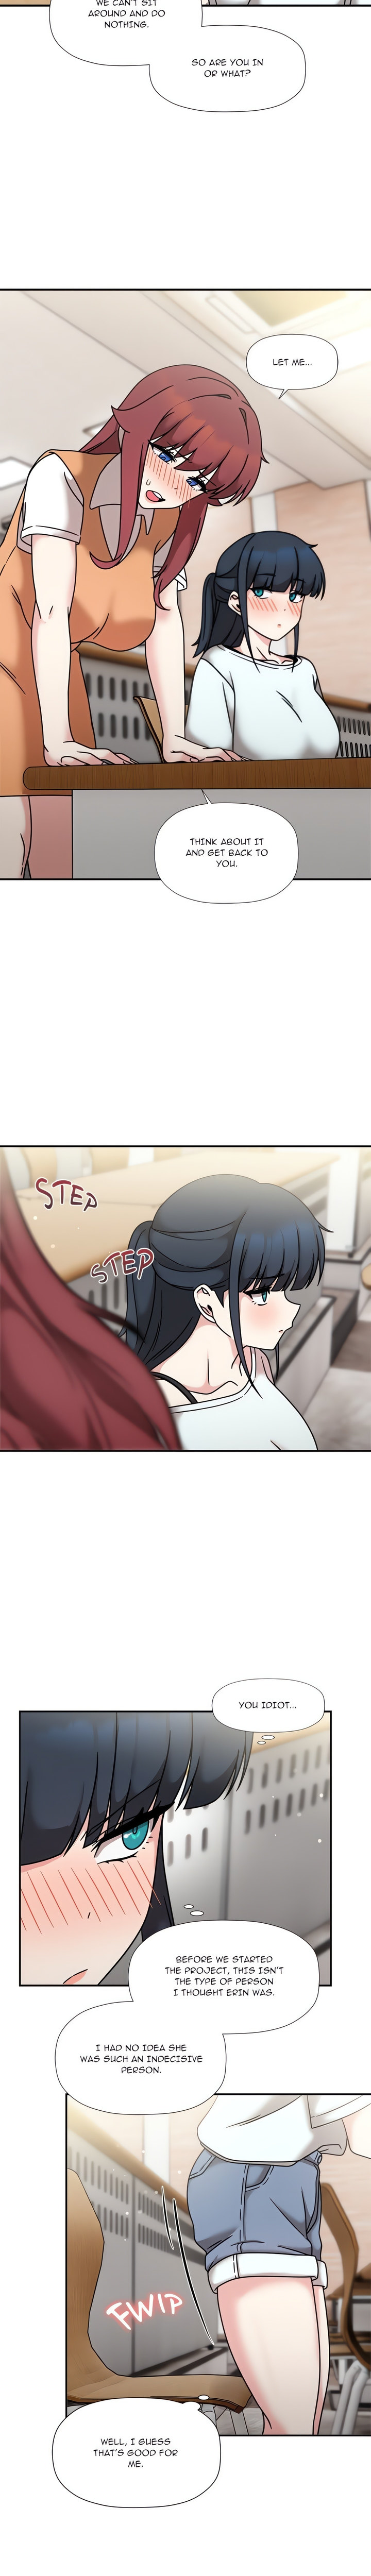 #Follow Me - Chapter 47 Page 8